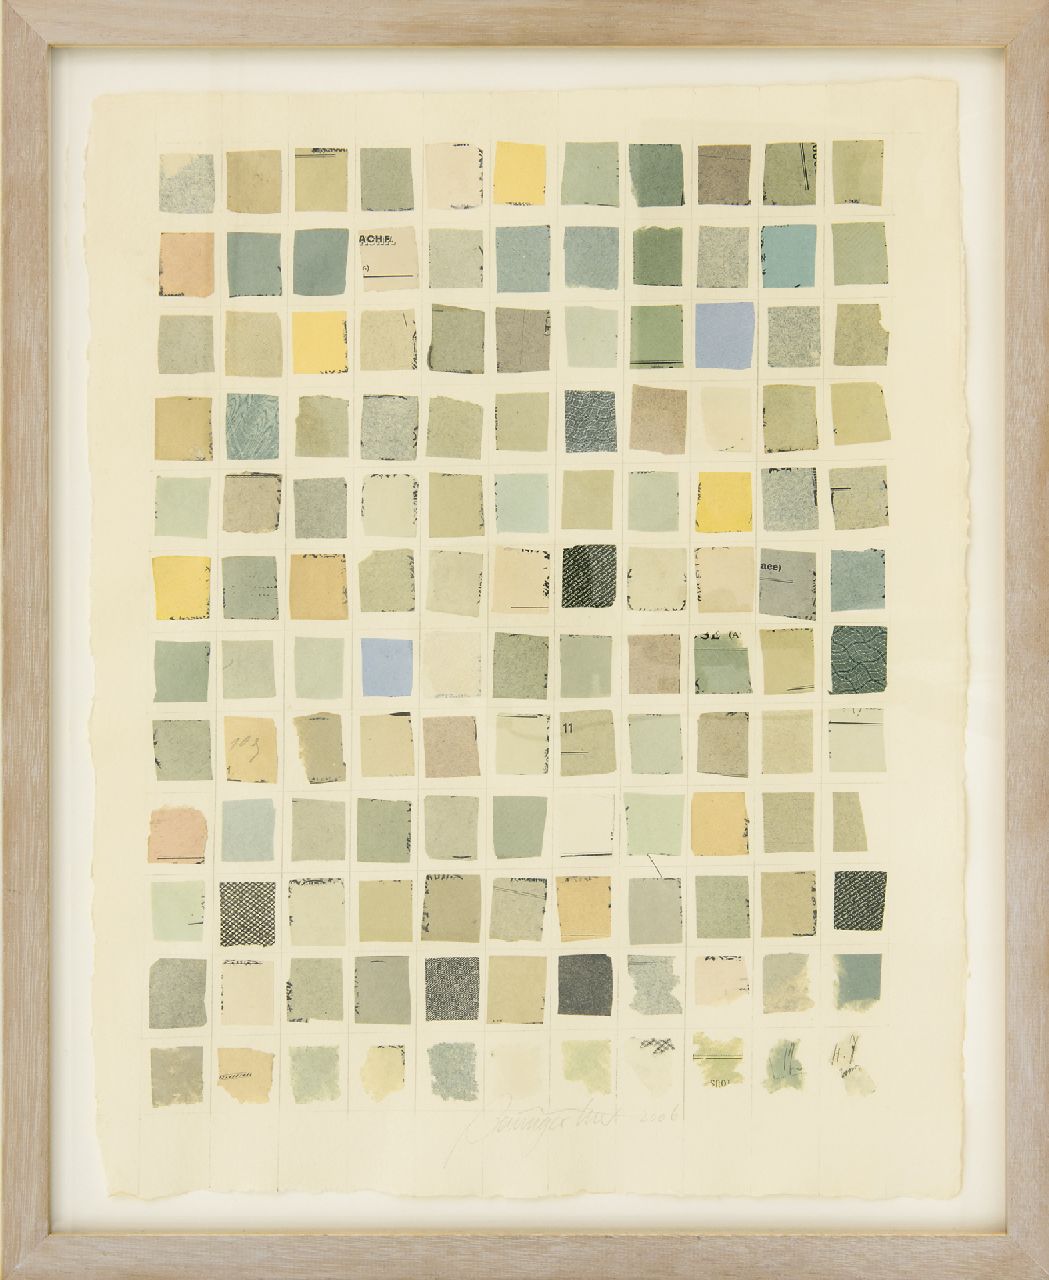 Baumgärtner K.  | Klaus Baumgärtner | Watercolours and drawings offered for sale | Untitled, collage on paper 47.7 x 37.0 cm, signed l.c. and dated 2006